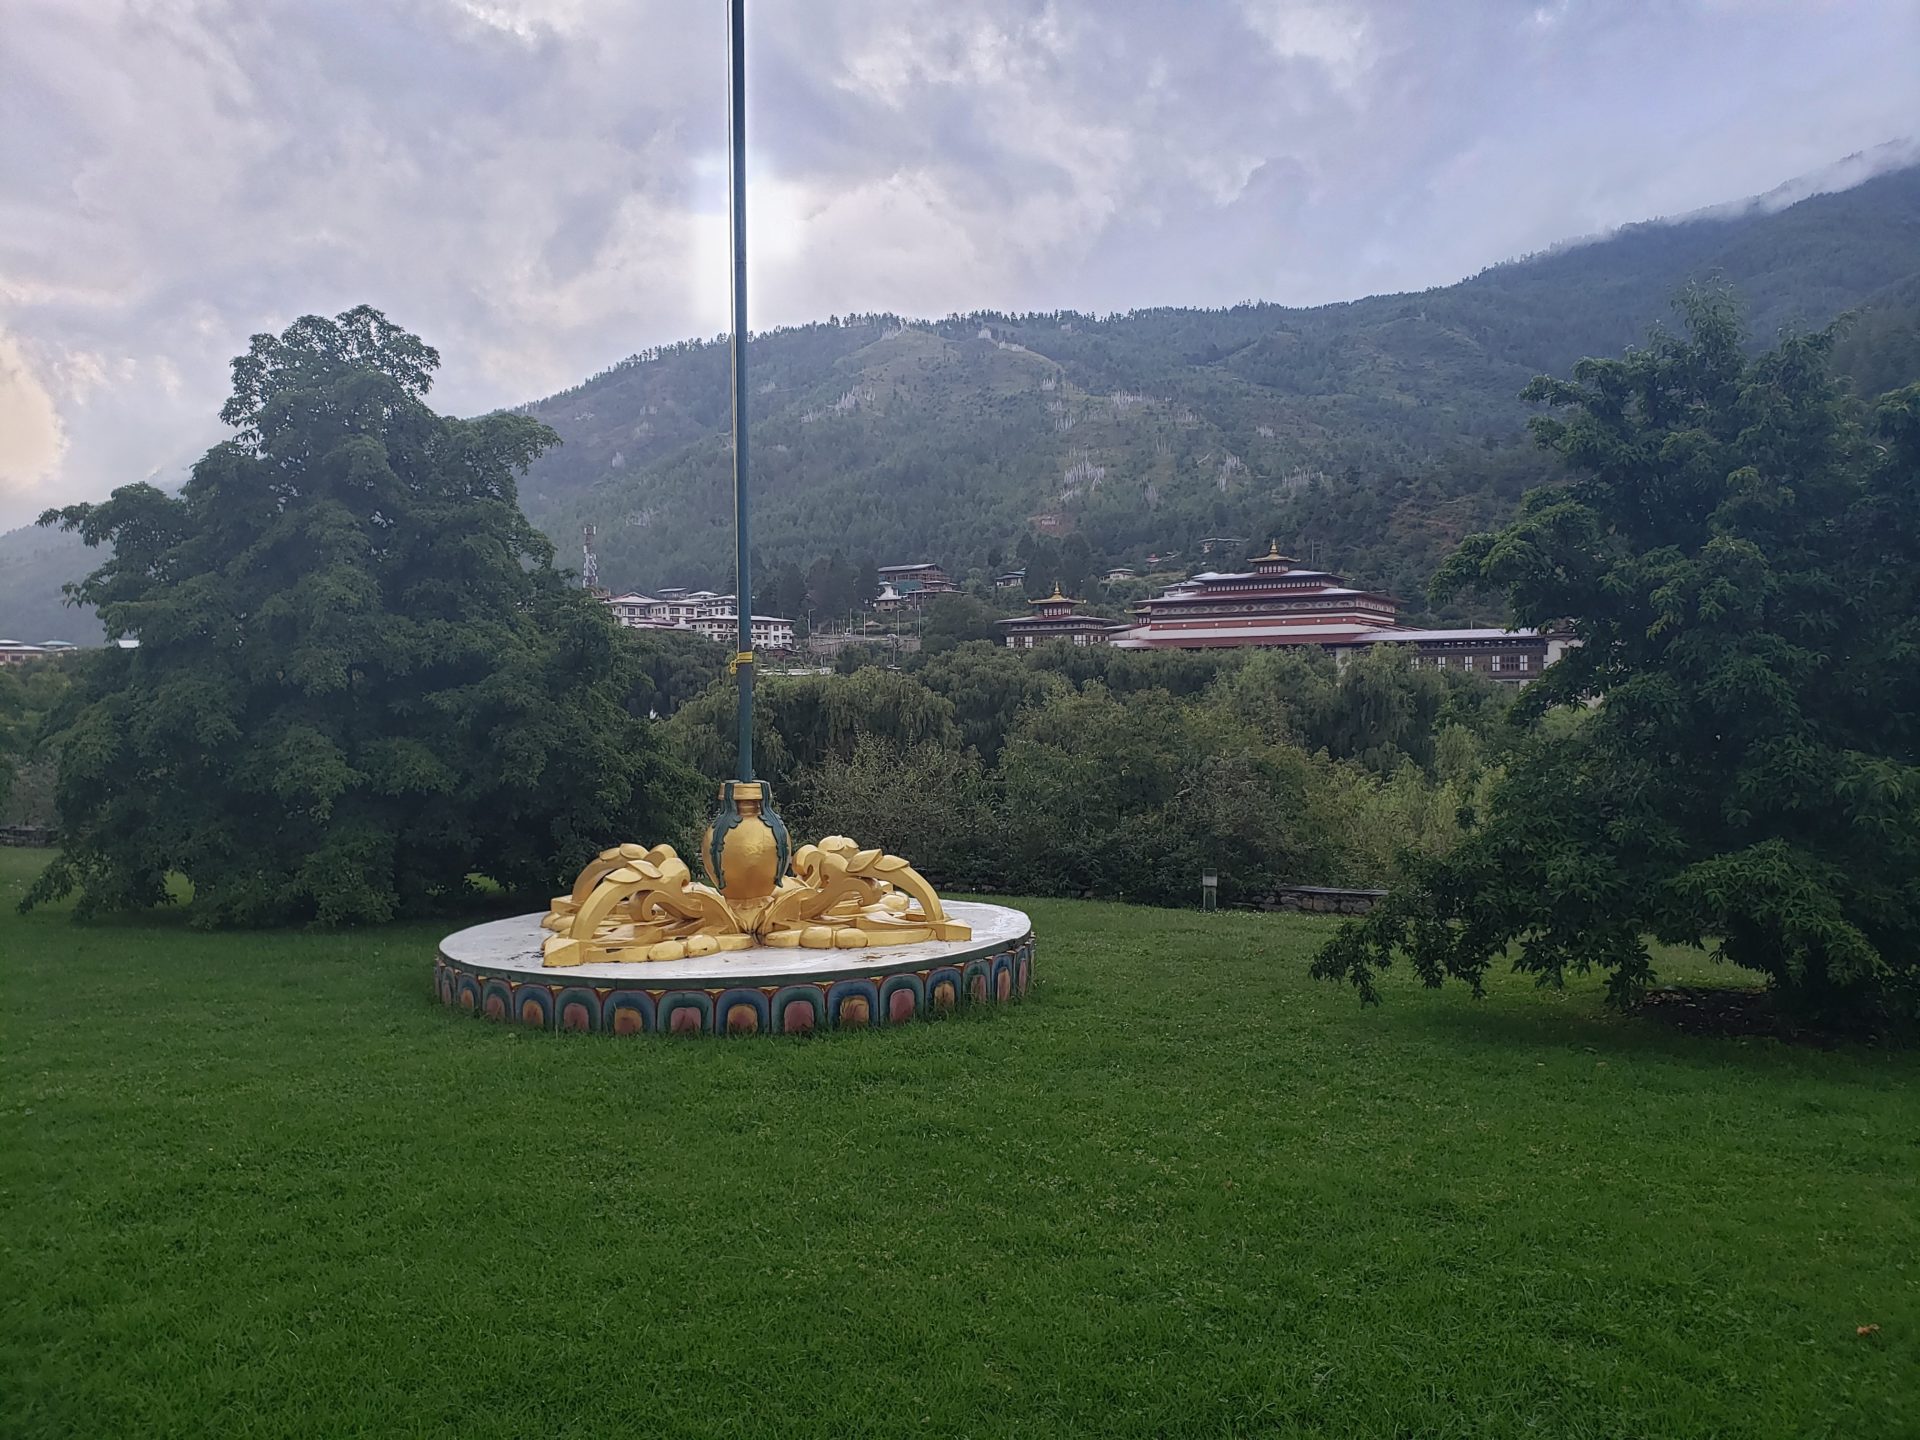 a statue on a pedestal in a grassy area with trees and mountains in the background